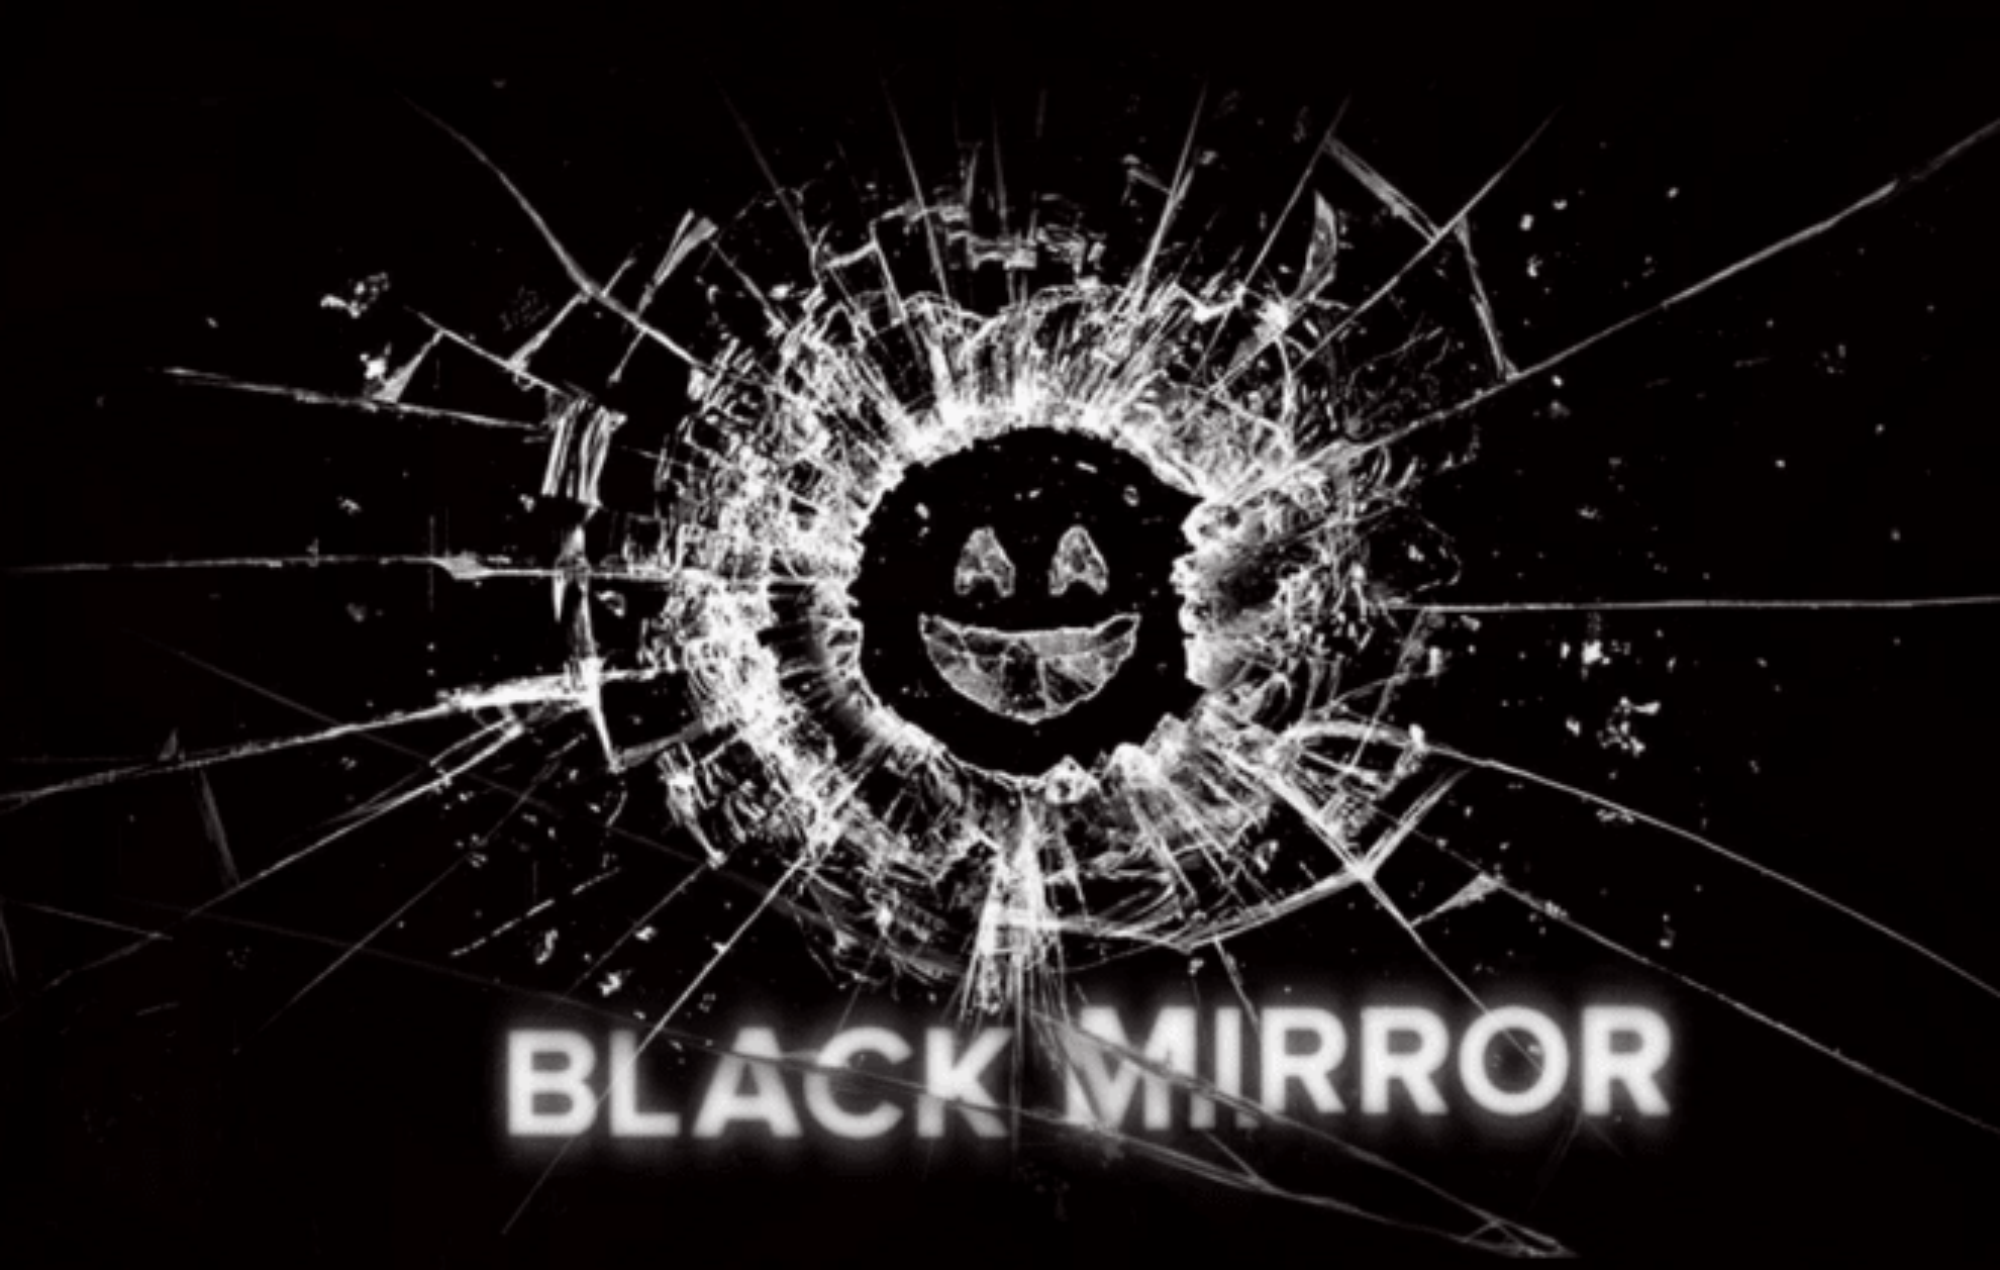 Netflix's Black Mirror logo showing cracked glass with a smiley face in the middle